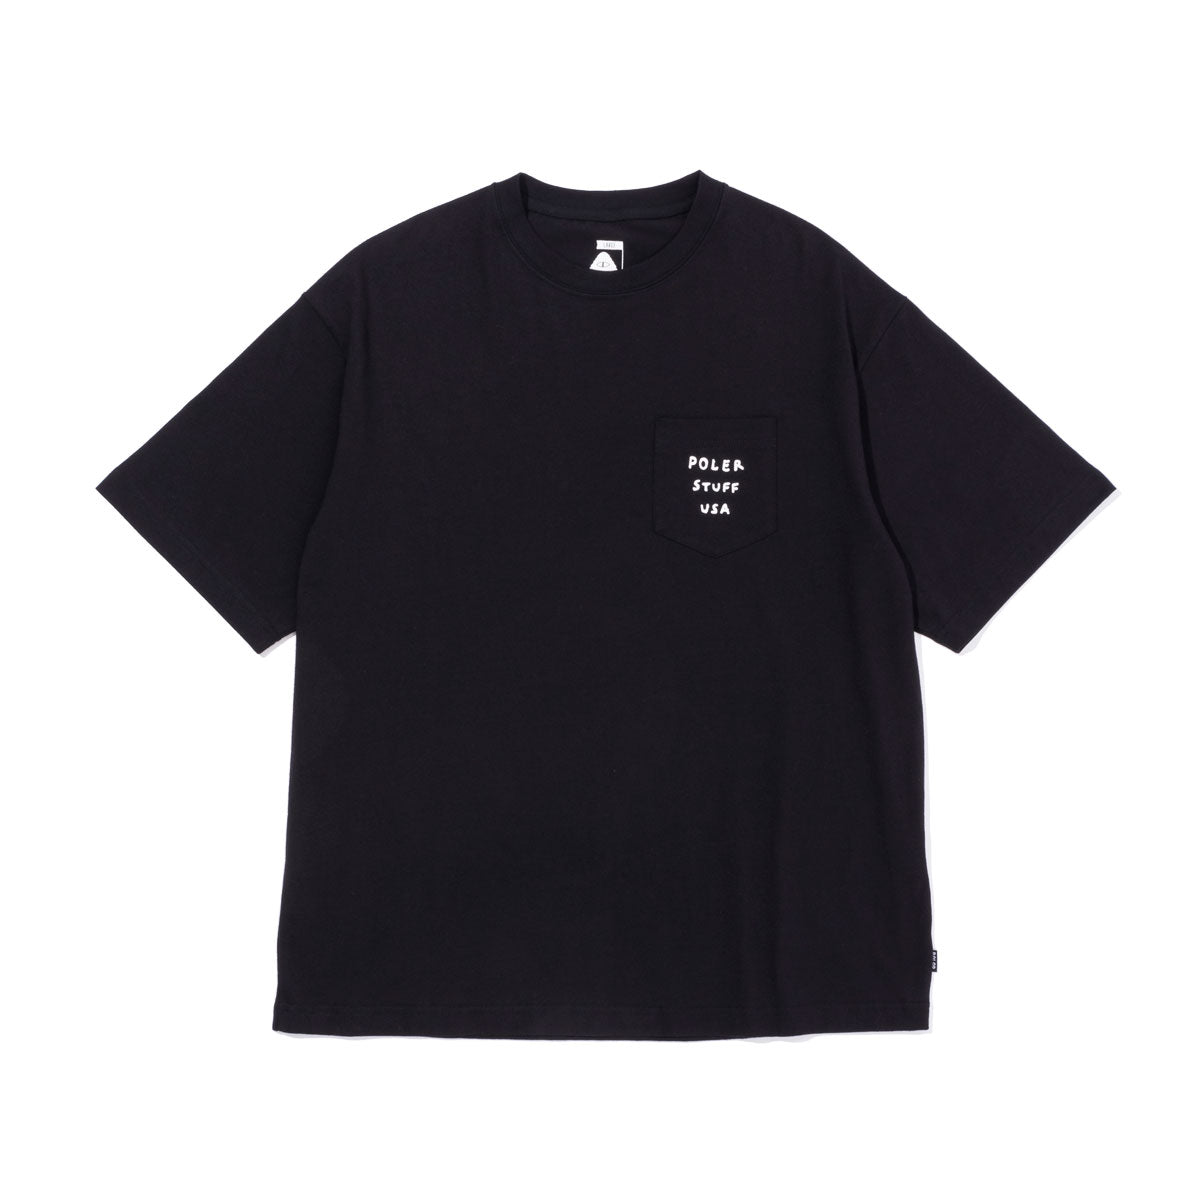 TENT RELAX FIT POCKET TEE